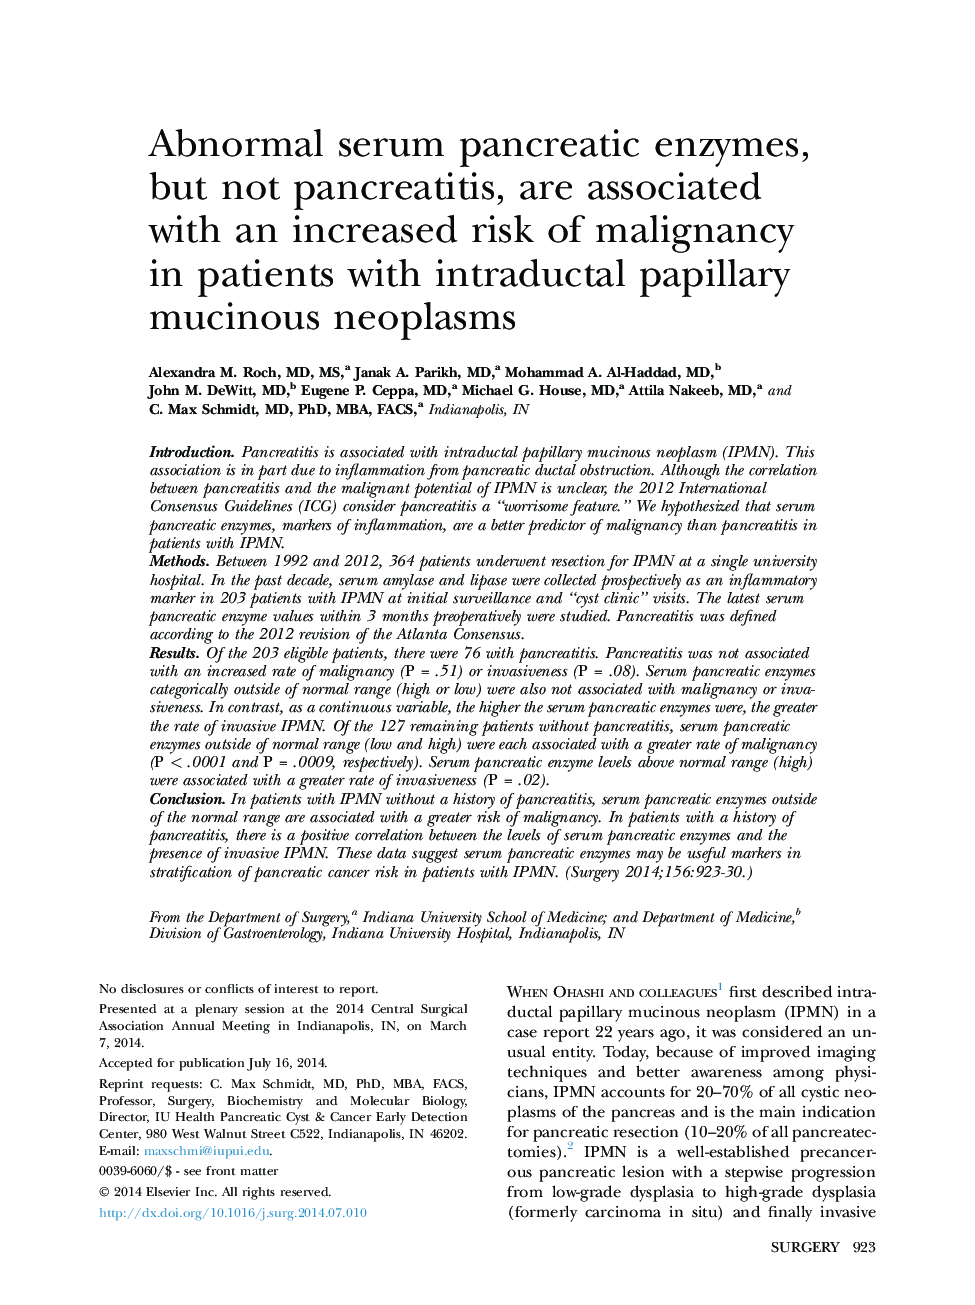 Abnormal serum pancreatic enzymes, but not pancreatitis, are associated with an increased risk of malignancy in patients with intraductal papillary mucinous neoplasms 